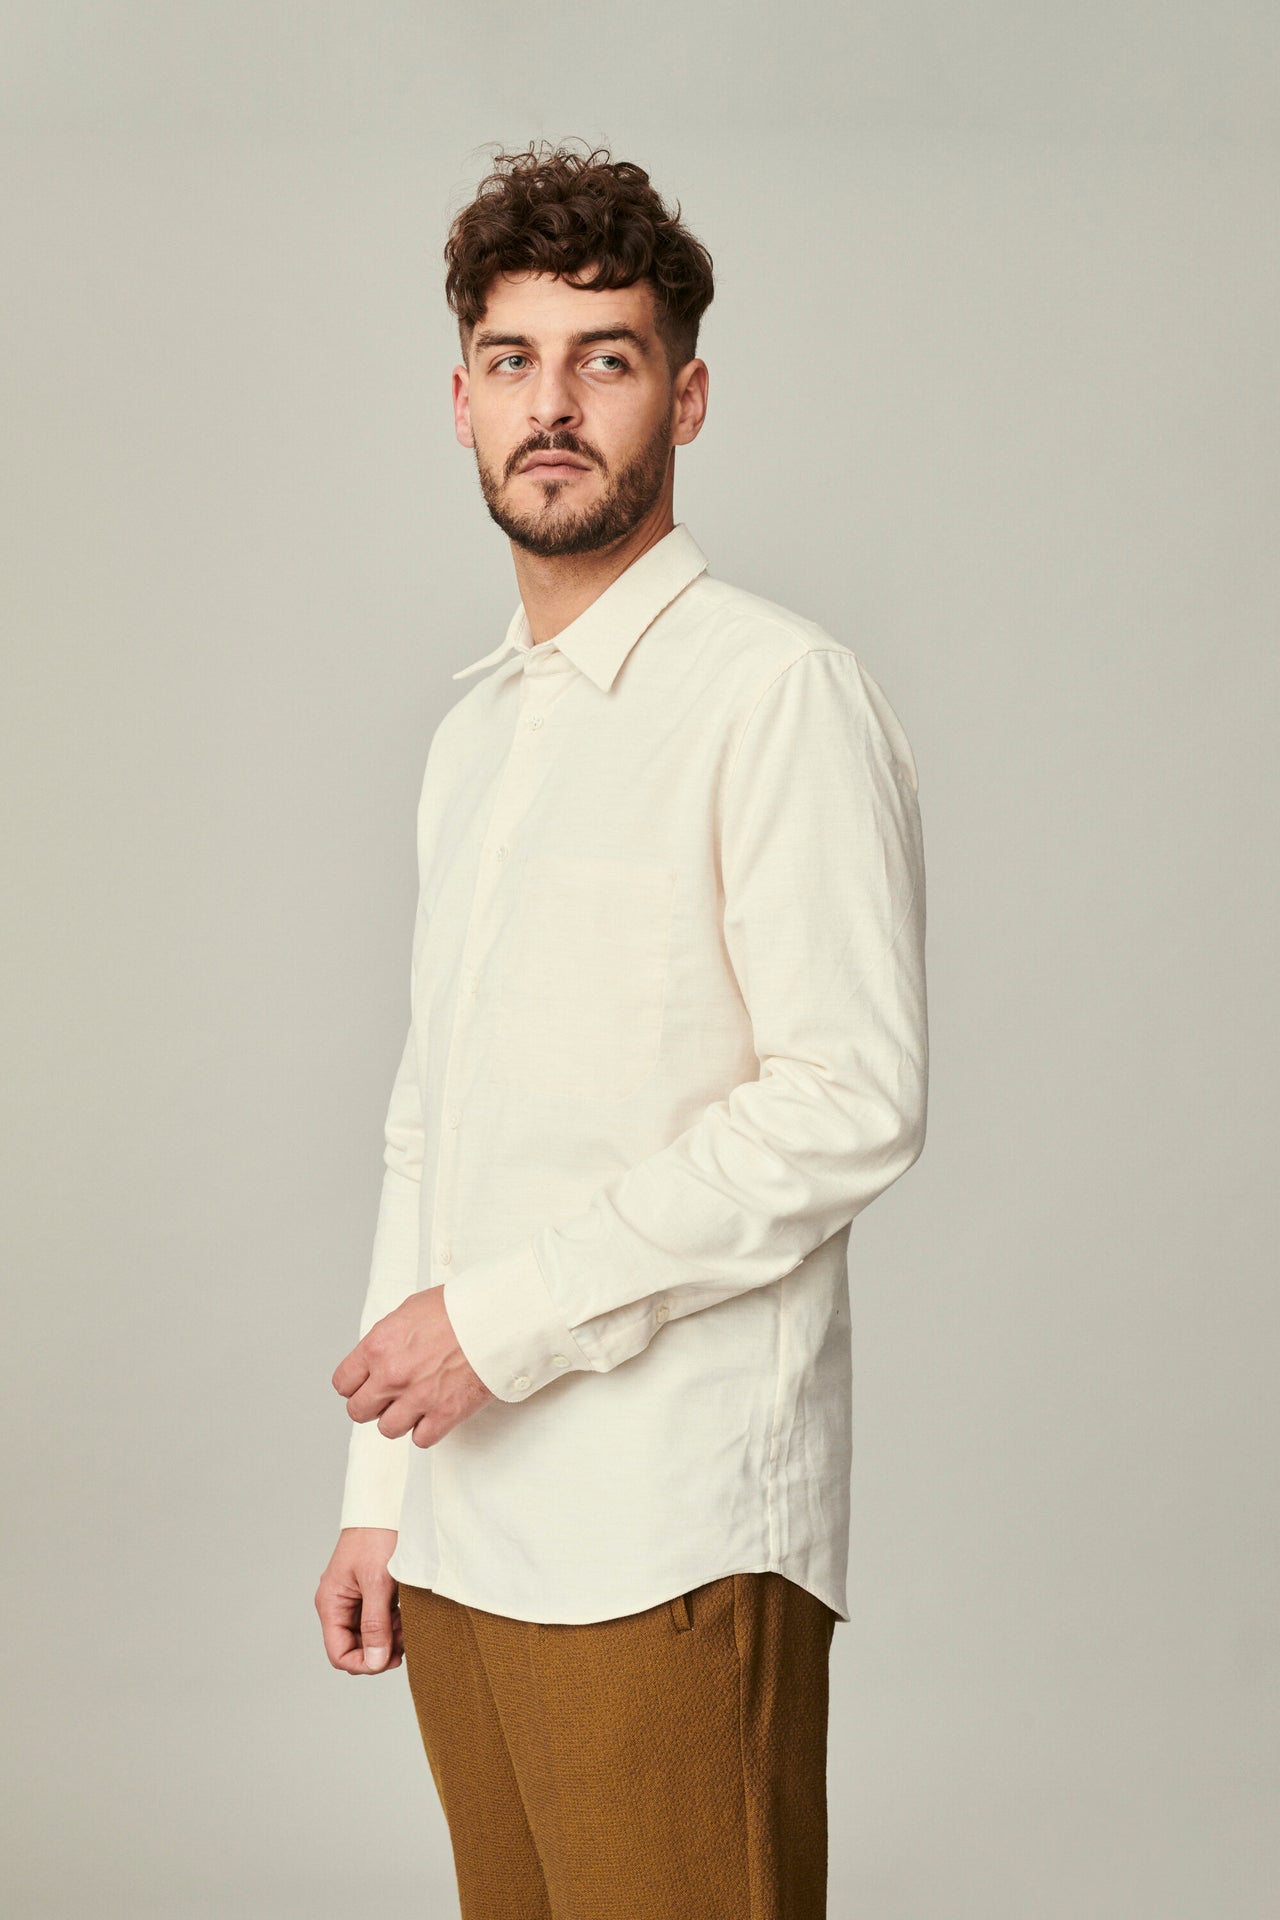 Feel Good Shirt In A Creamy White Japanese Baby Corduroy Cotton